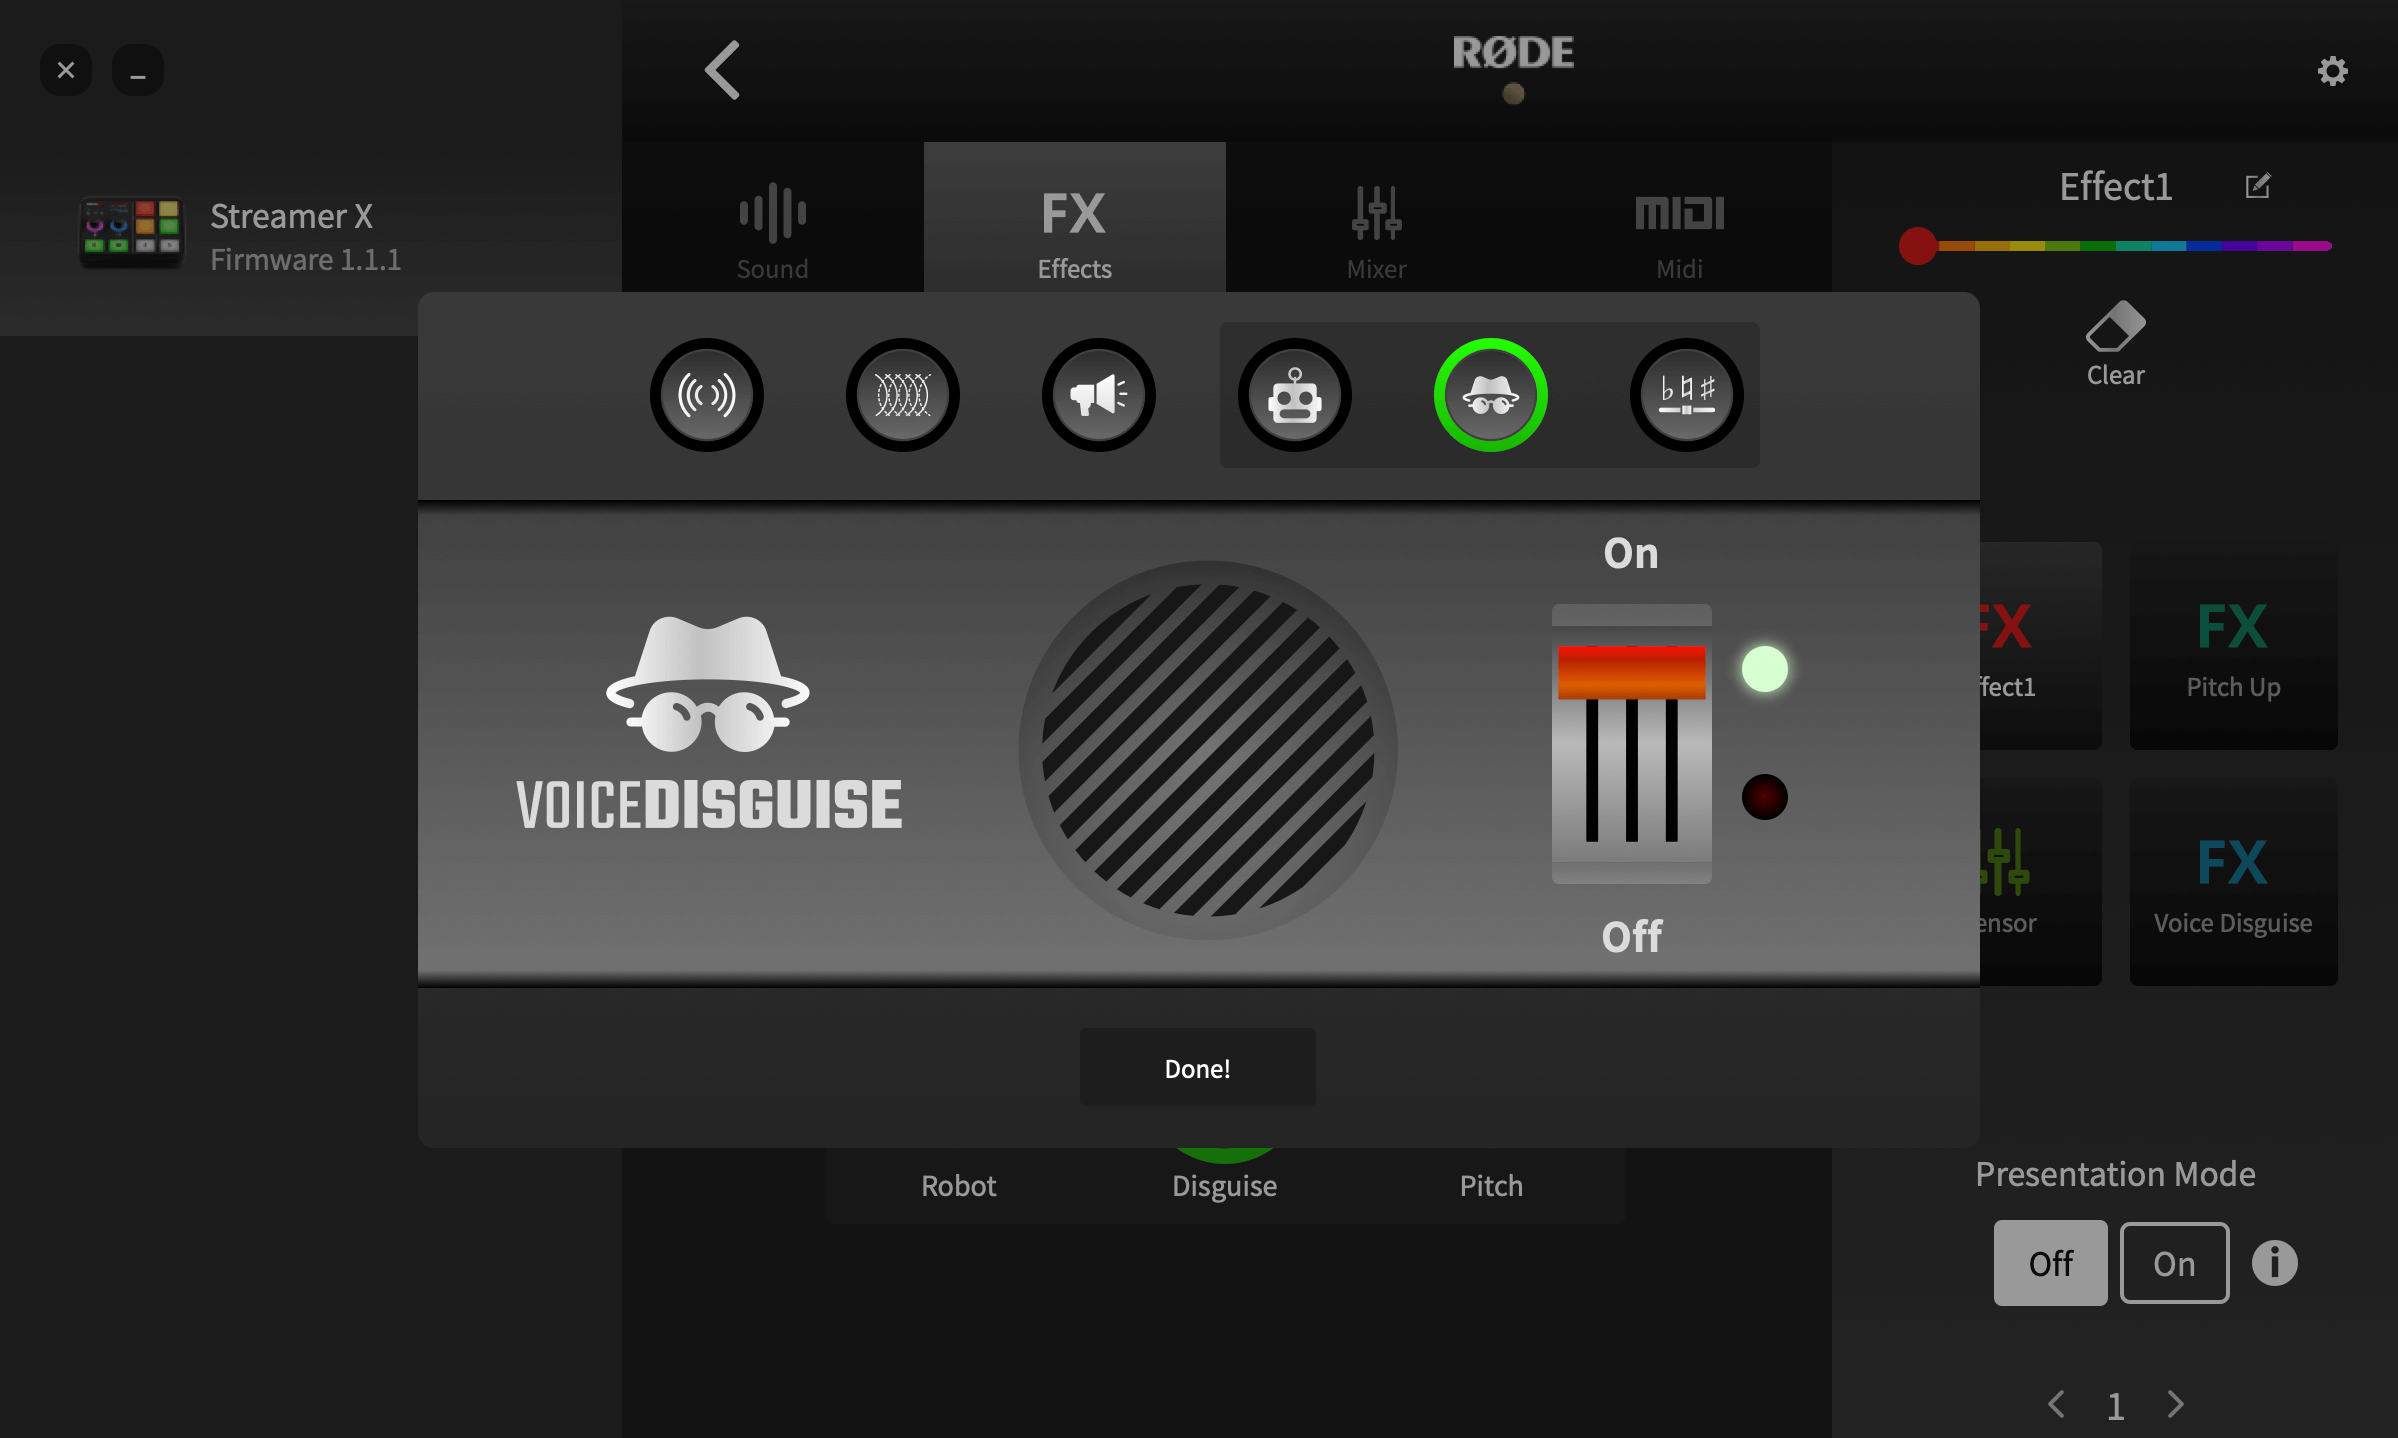 RØDE Central showing Streamer X voice disguise setting